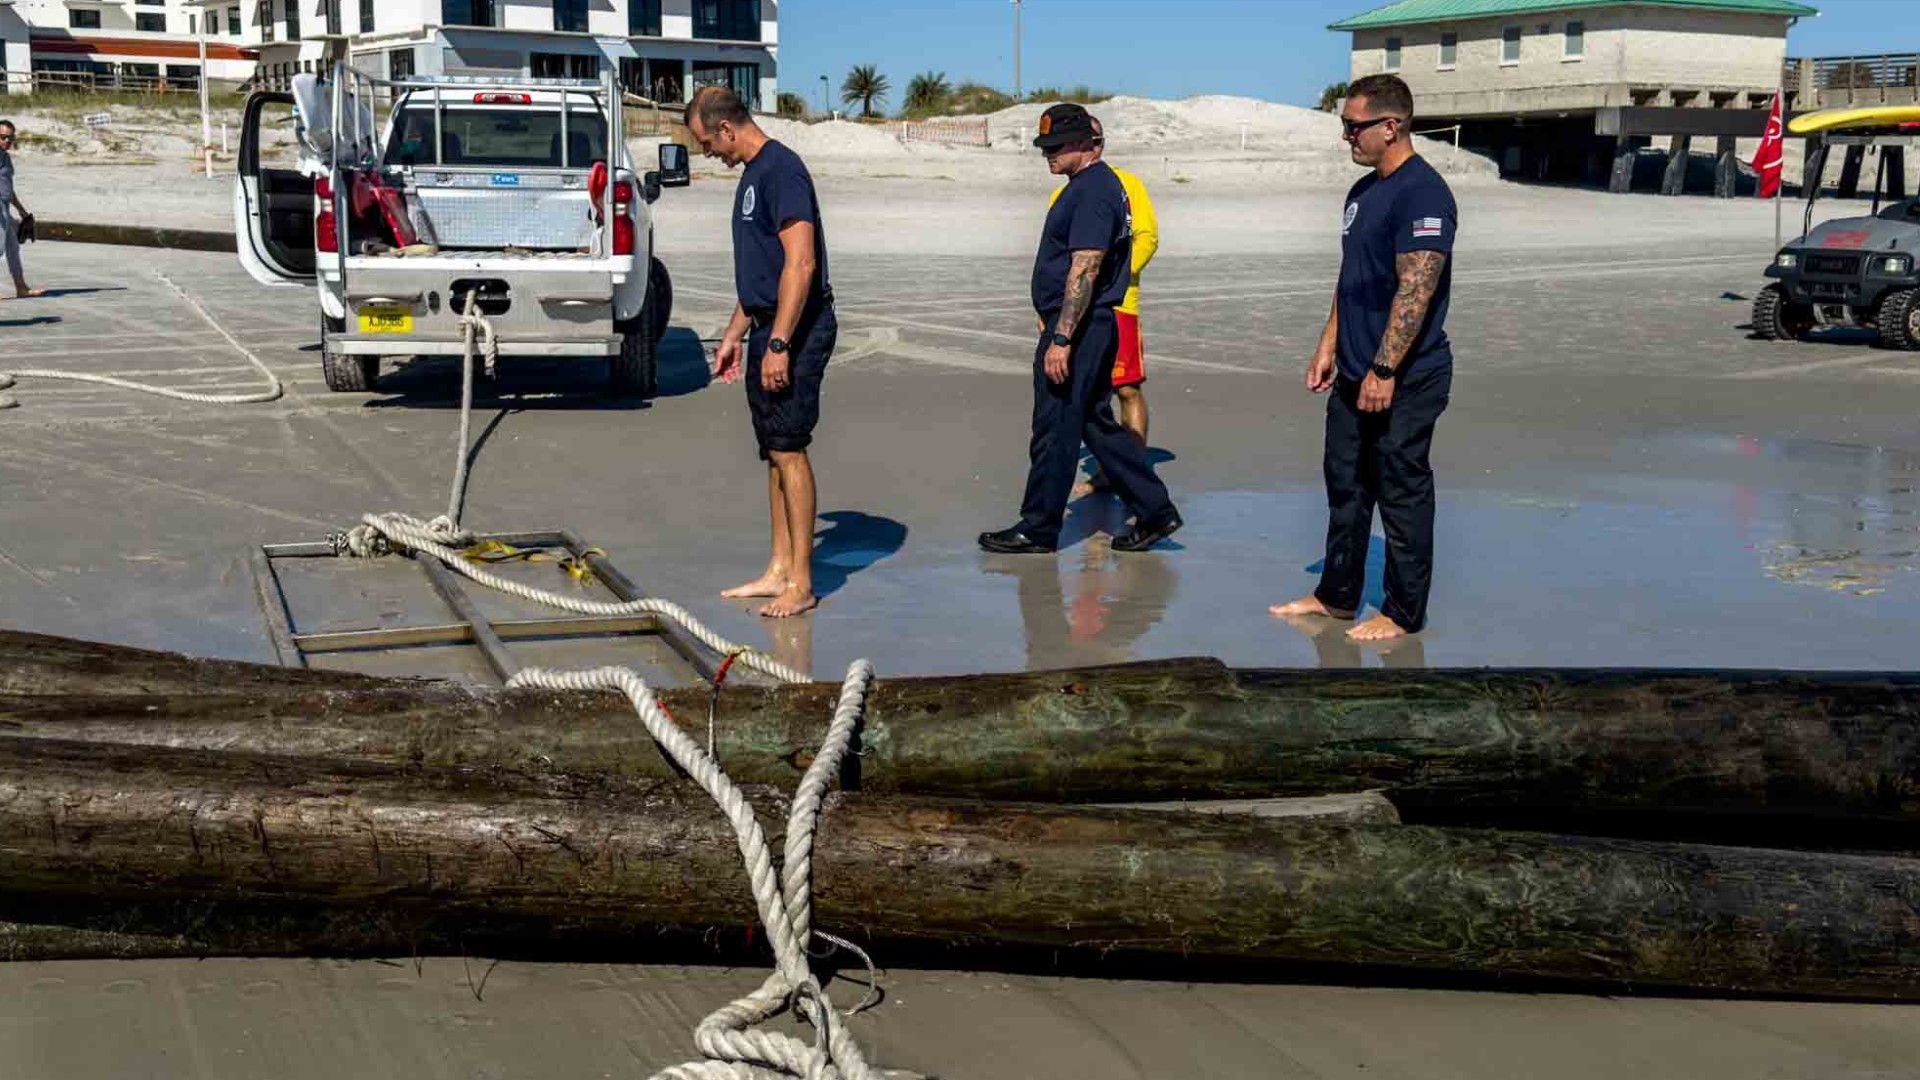 The poles drifted seven miles from Hanna Park to the pier before being spotted by a Jacksonville Fire Rescue captain.